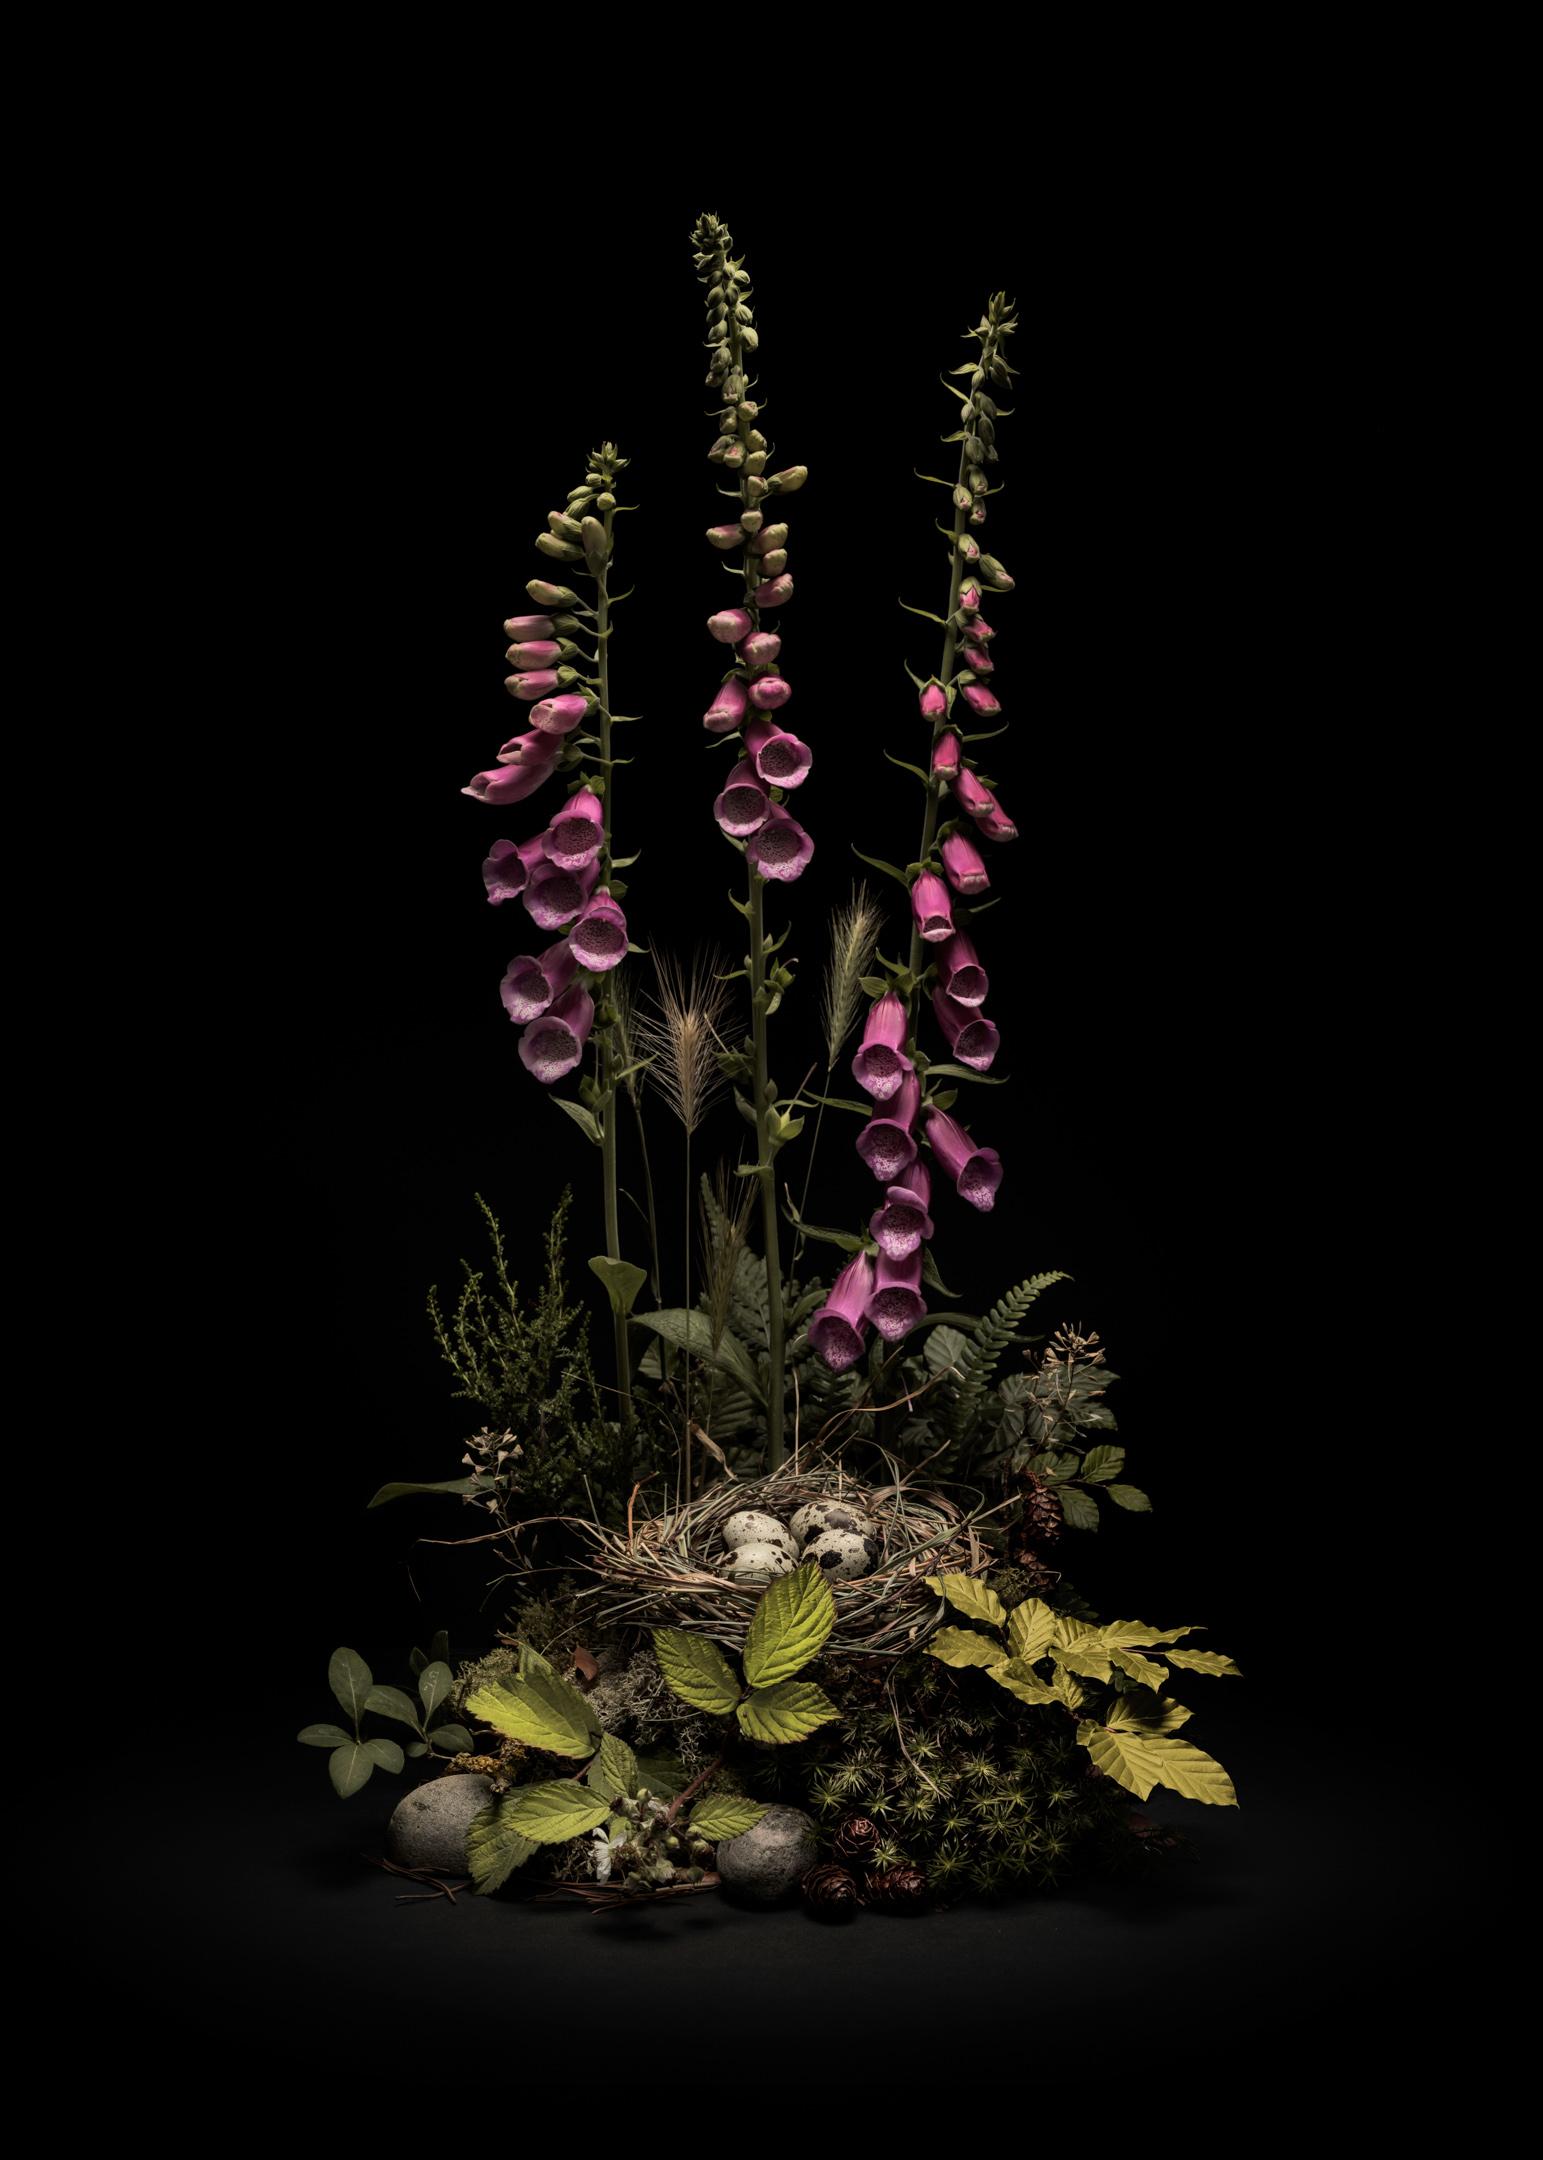 Dar Flora #5, May Foxgloves, A floral arrangement of wild flowers and plants